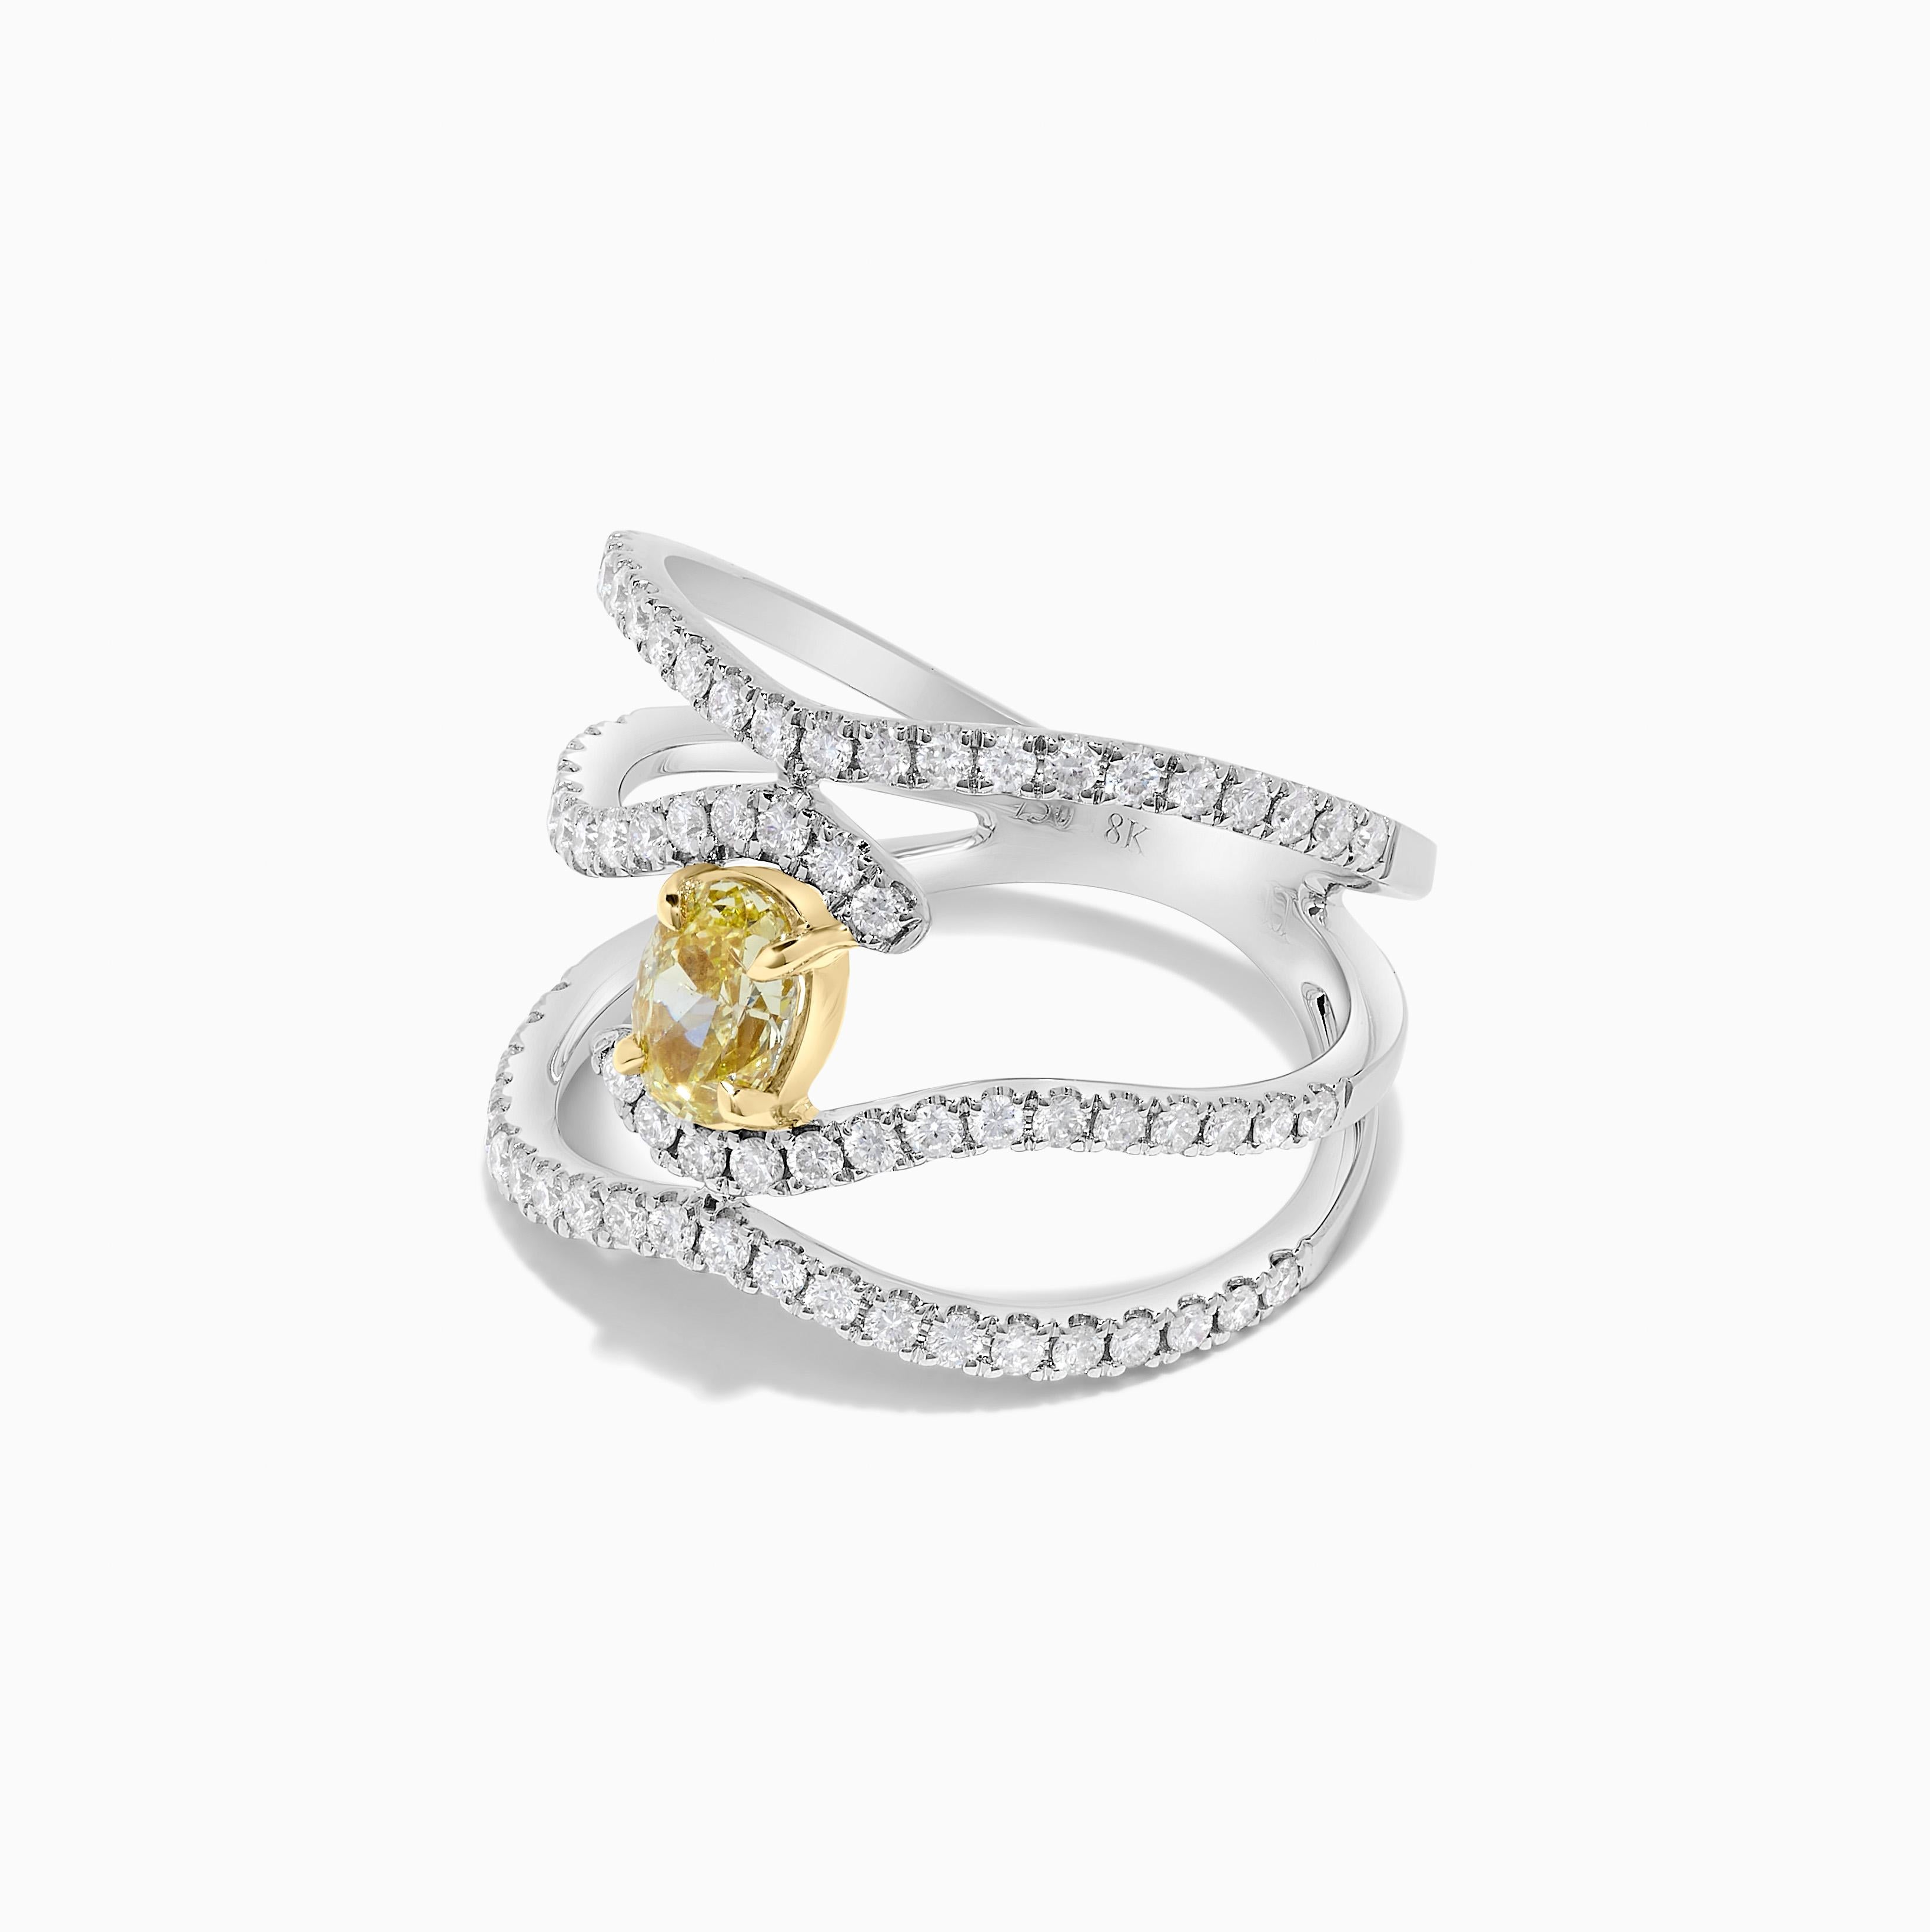 RareGemWorld's classic GIA certified diamond ring. Mounted in a beautiful 18K Yellow and White Gold setting with a natural oval cut yellow diamond. The yellow diamond is surrounded by small round natural white diamond melee. This ring is guaranteed